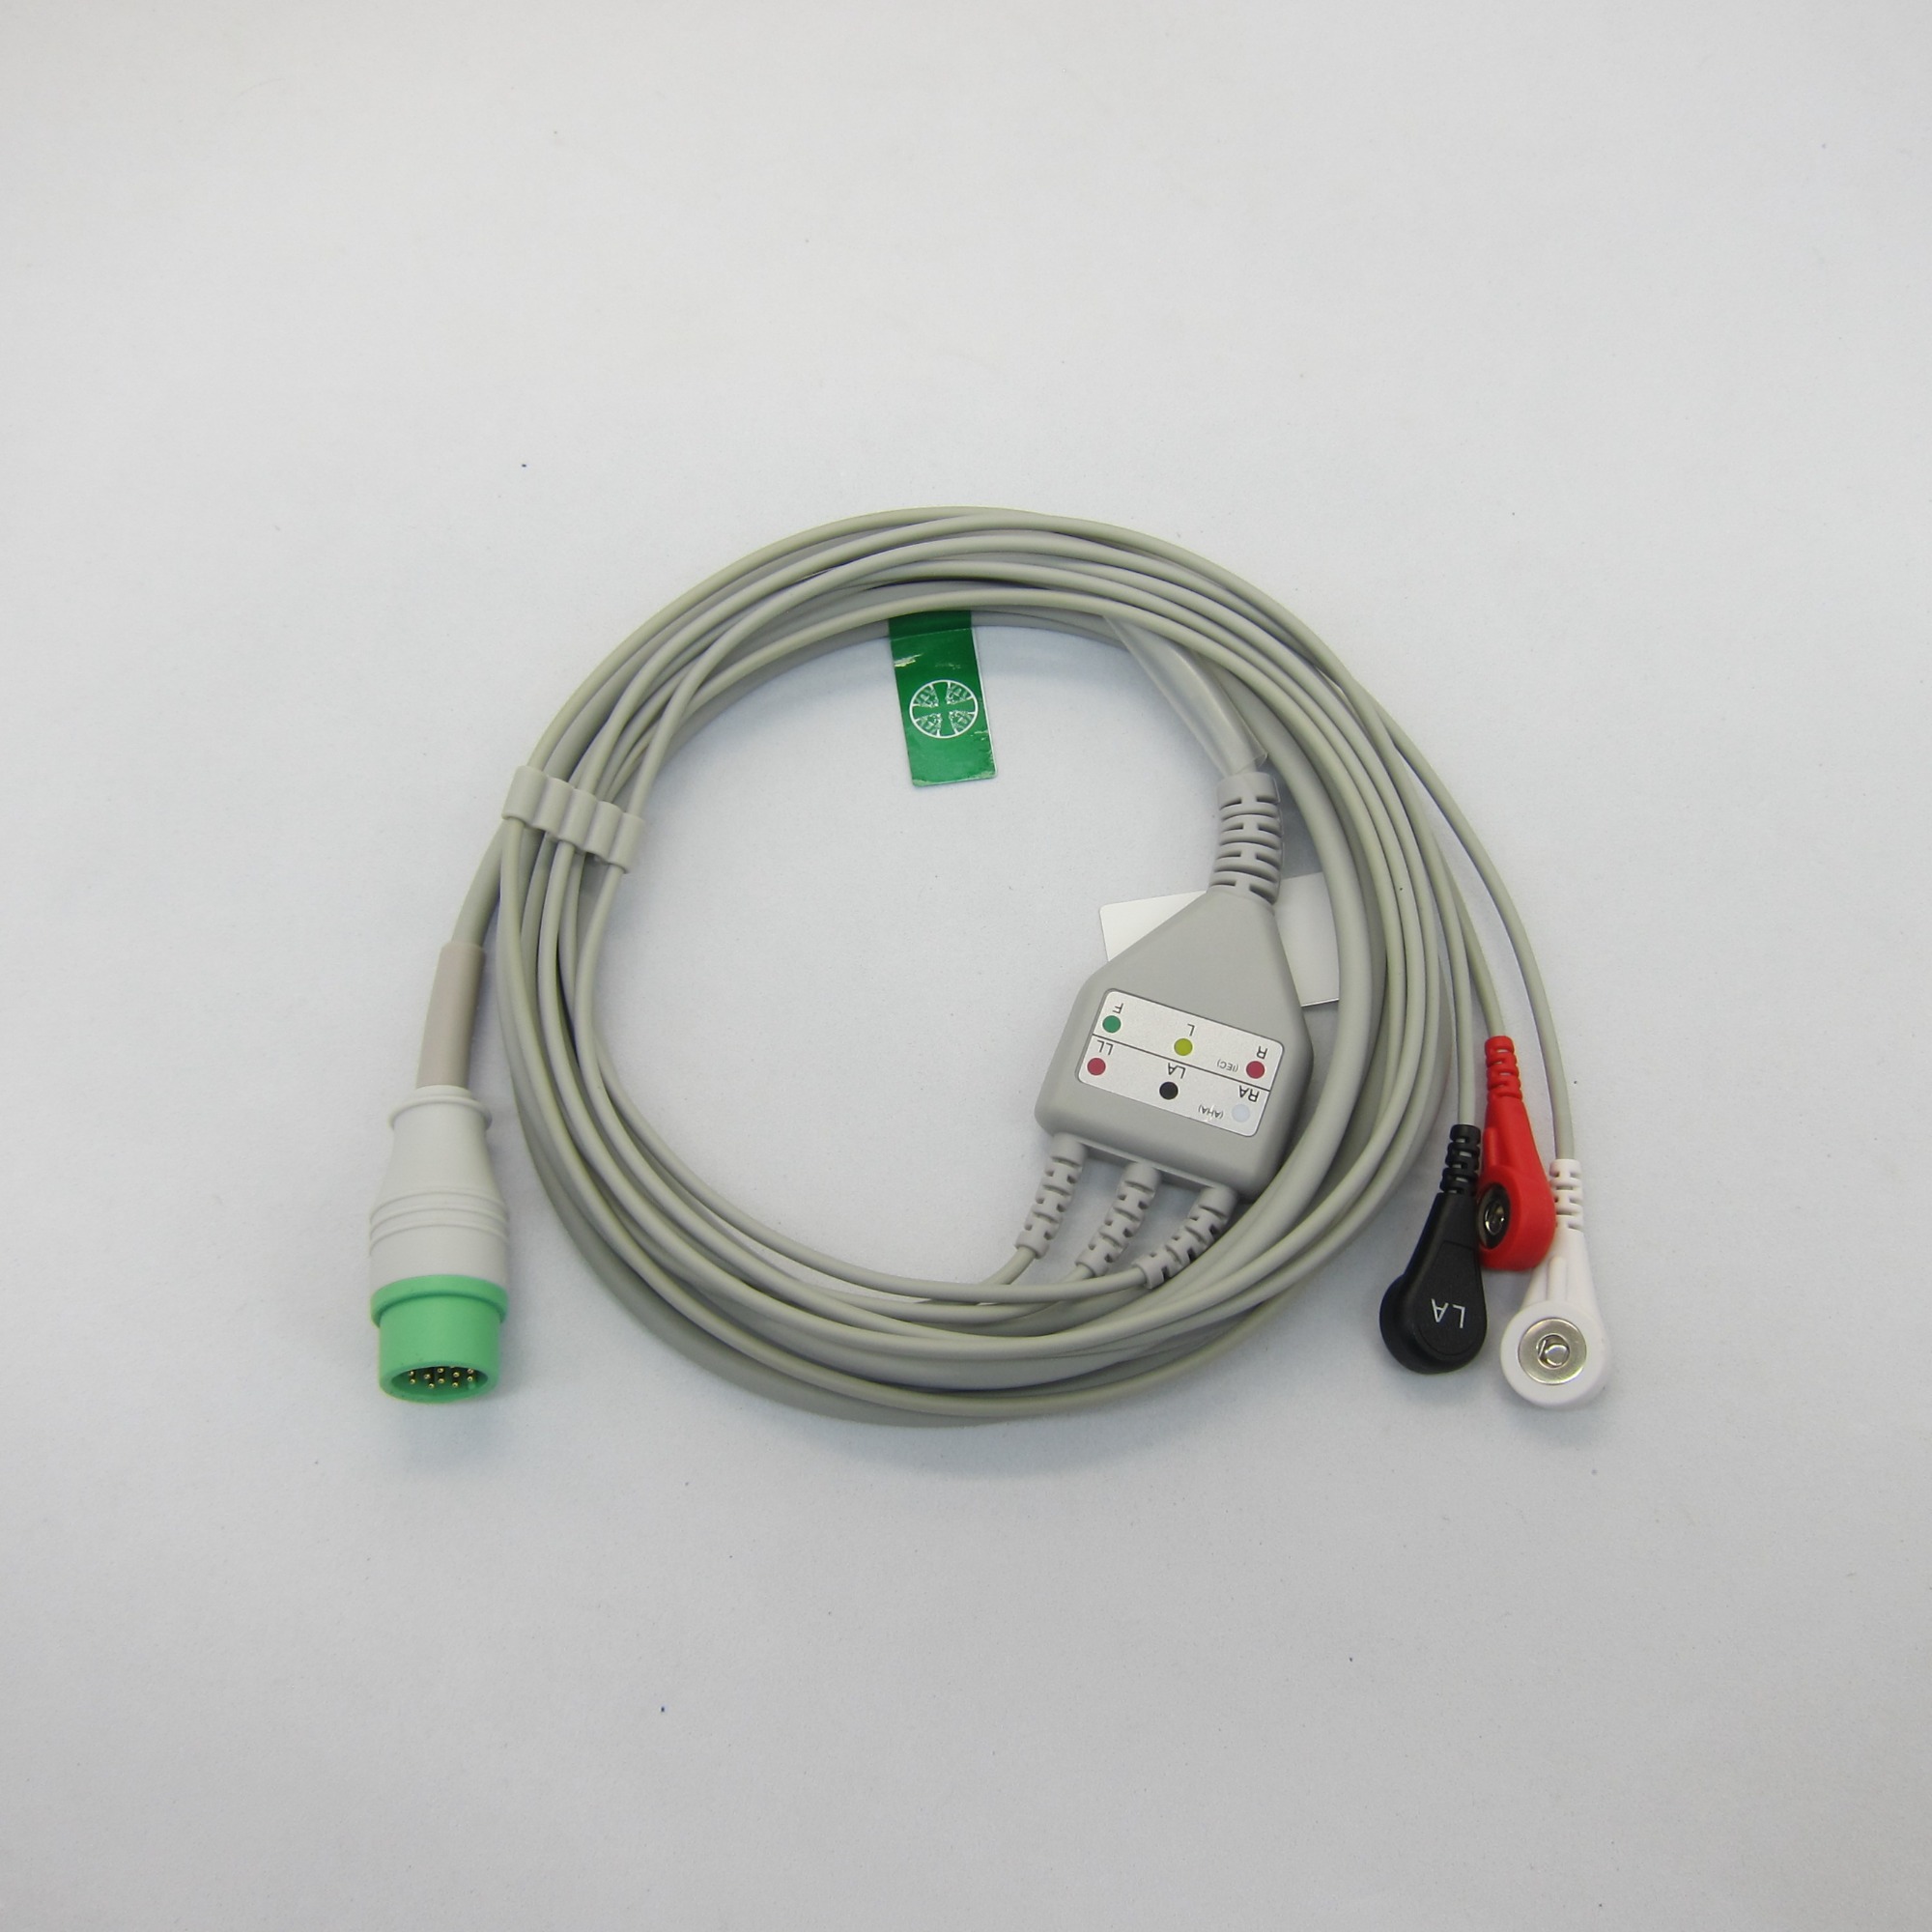 Medical One-piece 3 or 5 Leads Snap Or Clip ECG cable and leadwires for biolight A-series